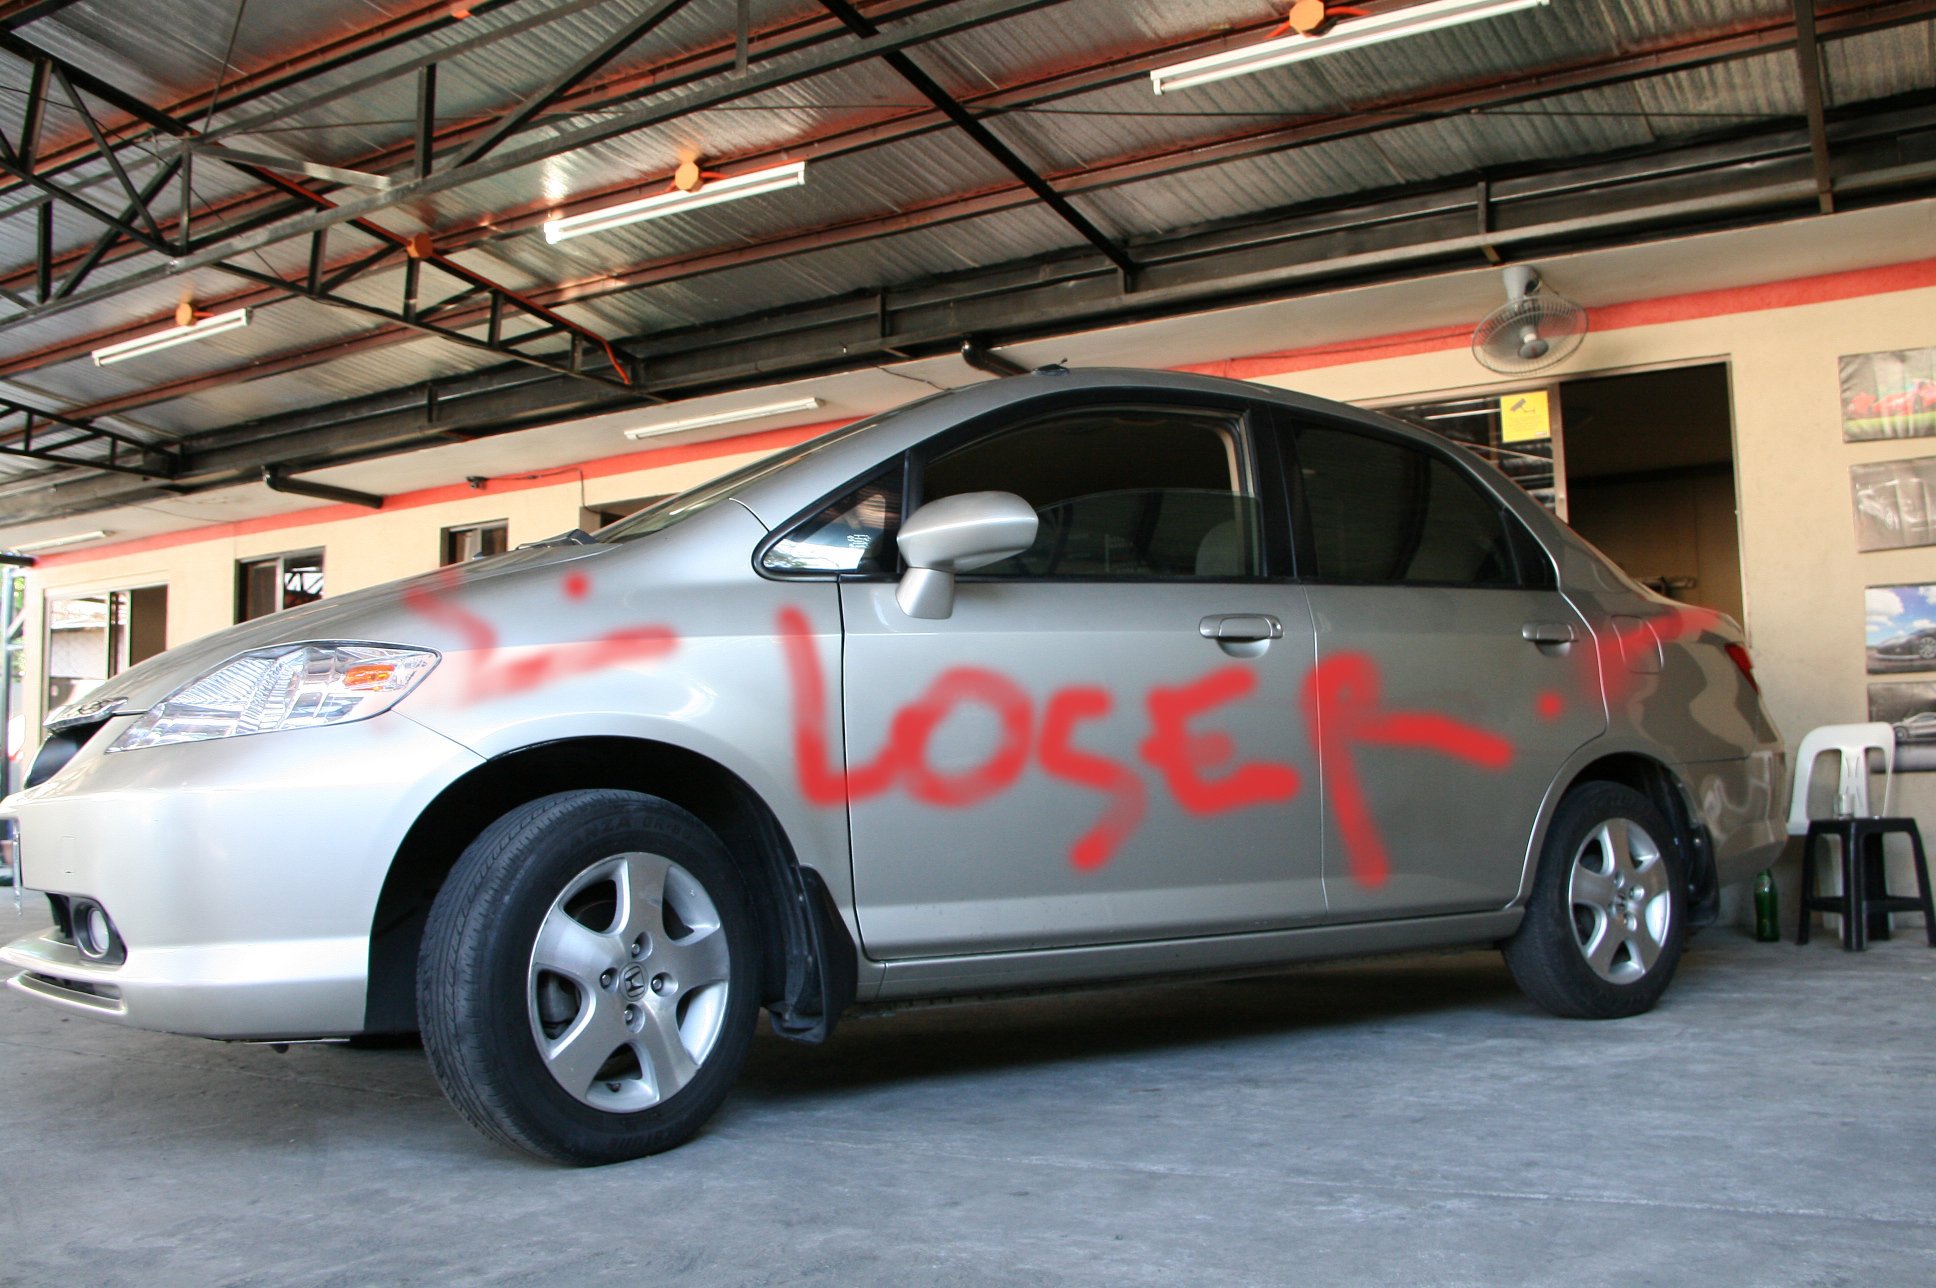 8 Ways to Get Spray Paint off a Car